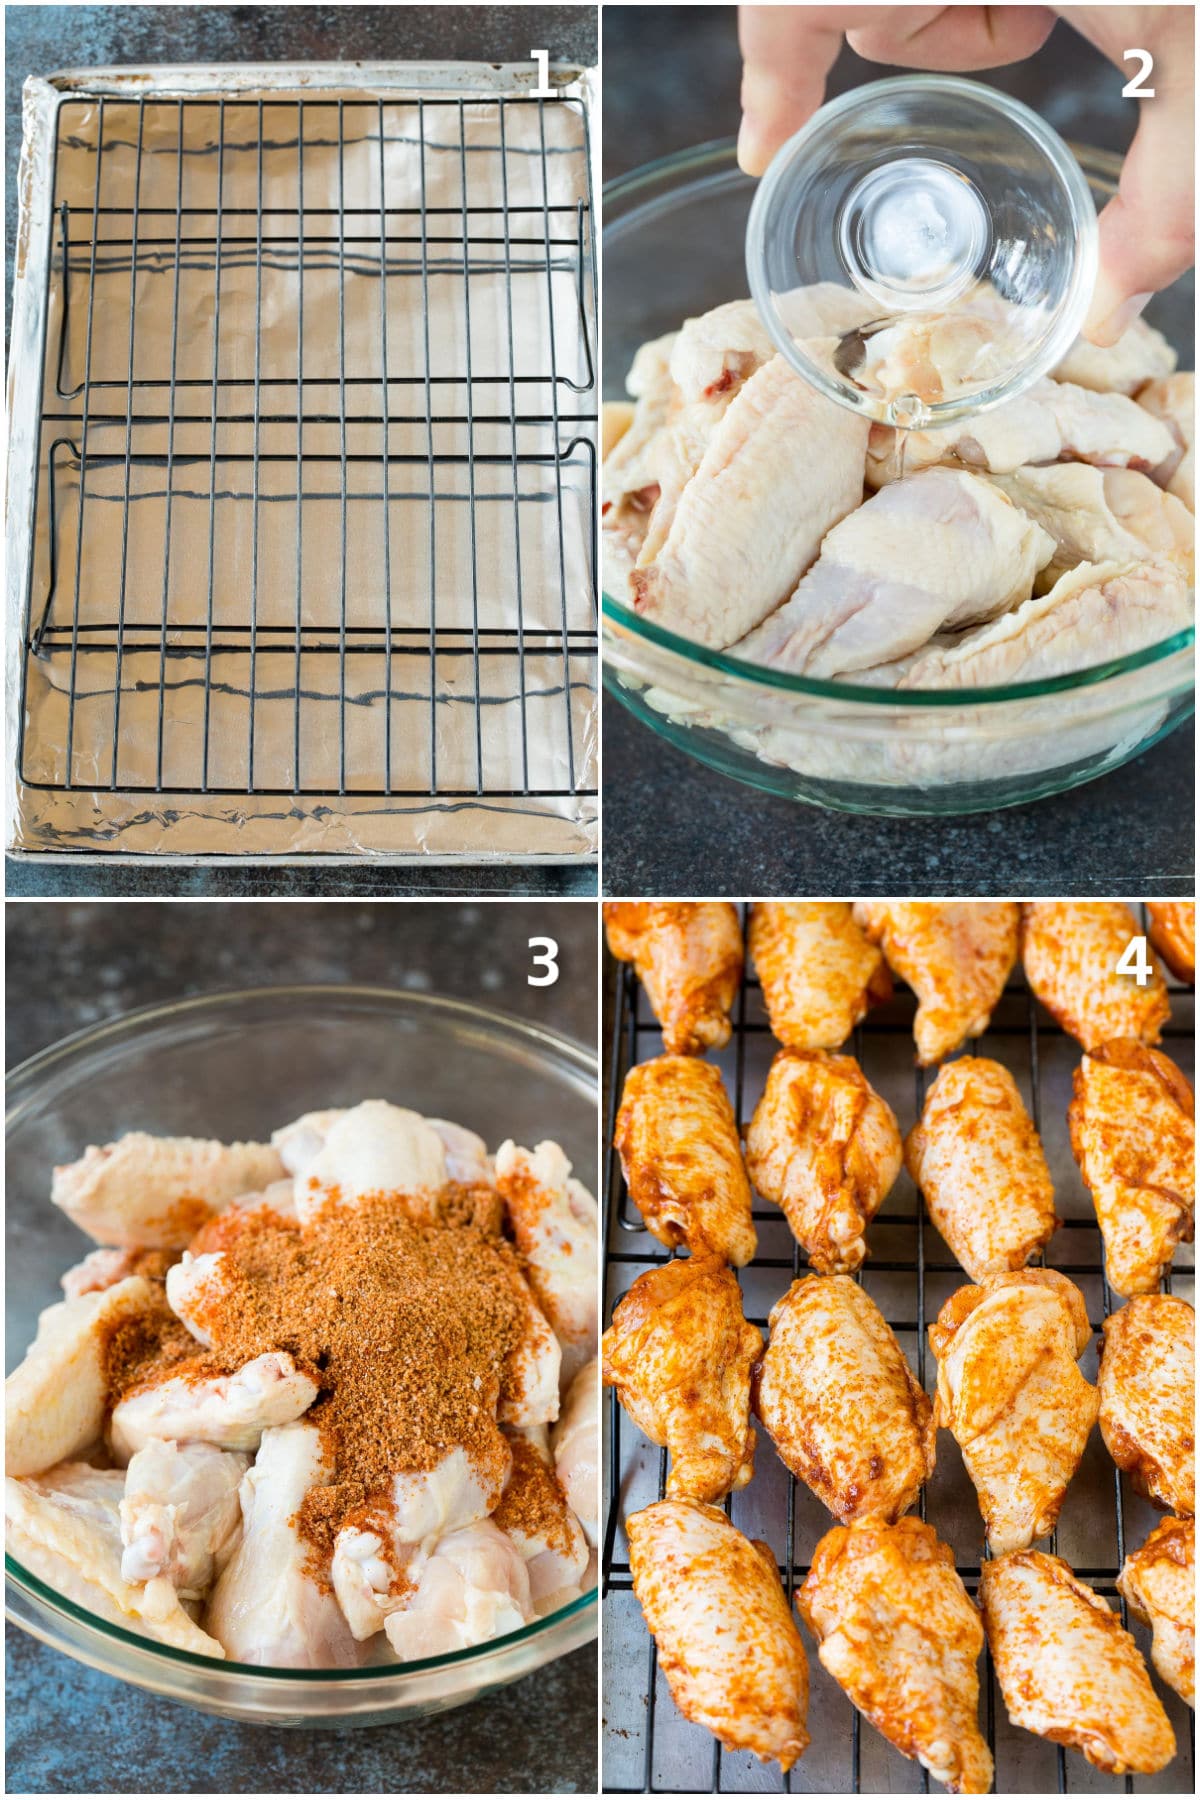 Step by step shots showing how to bake chicken wings.